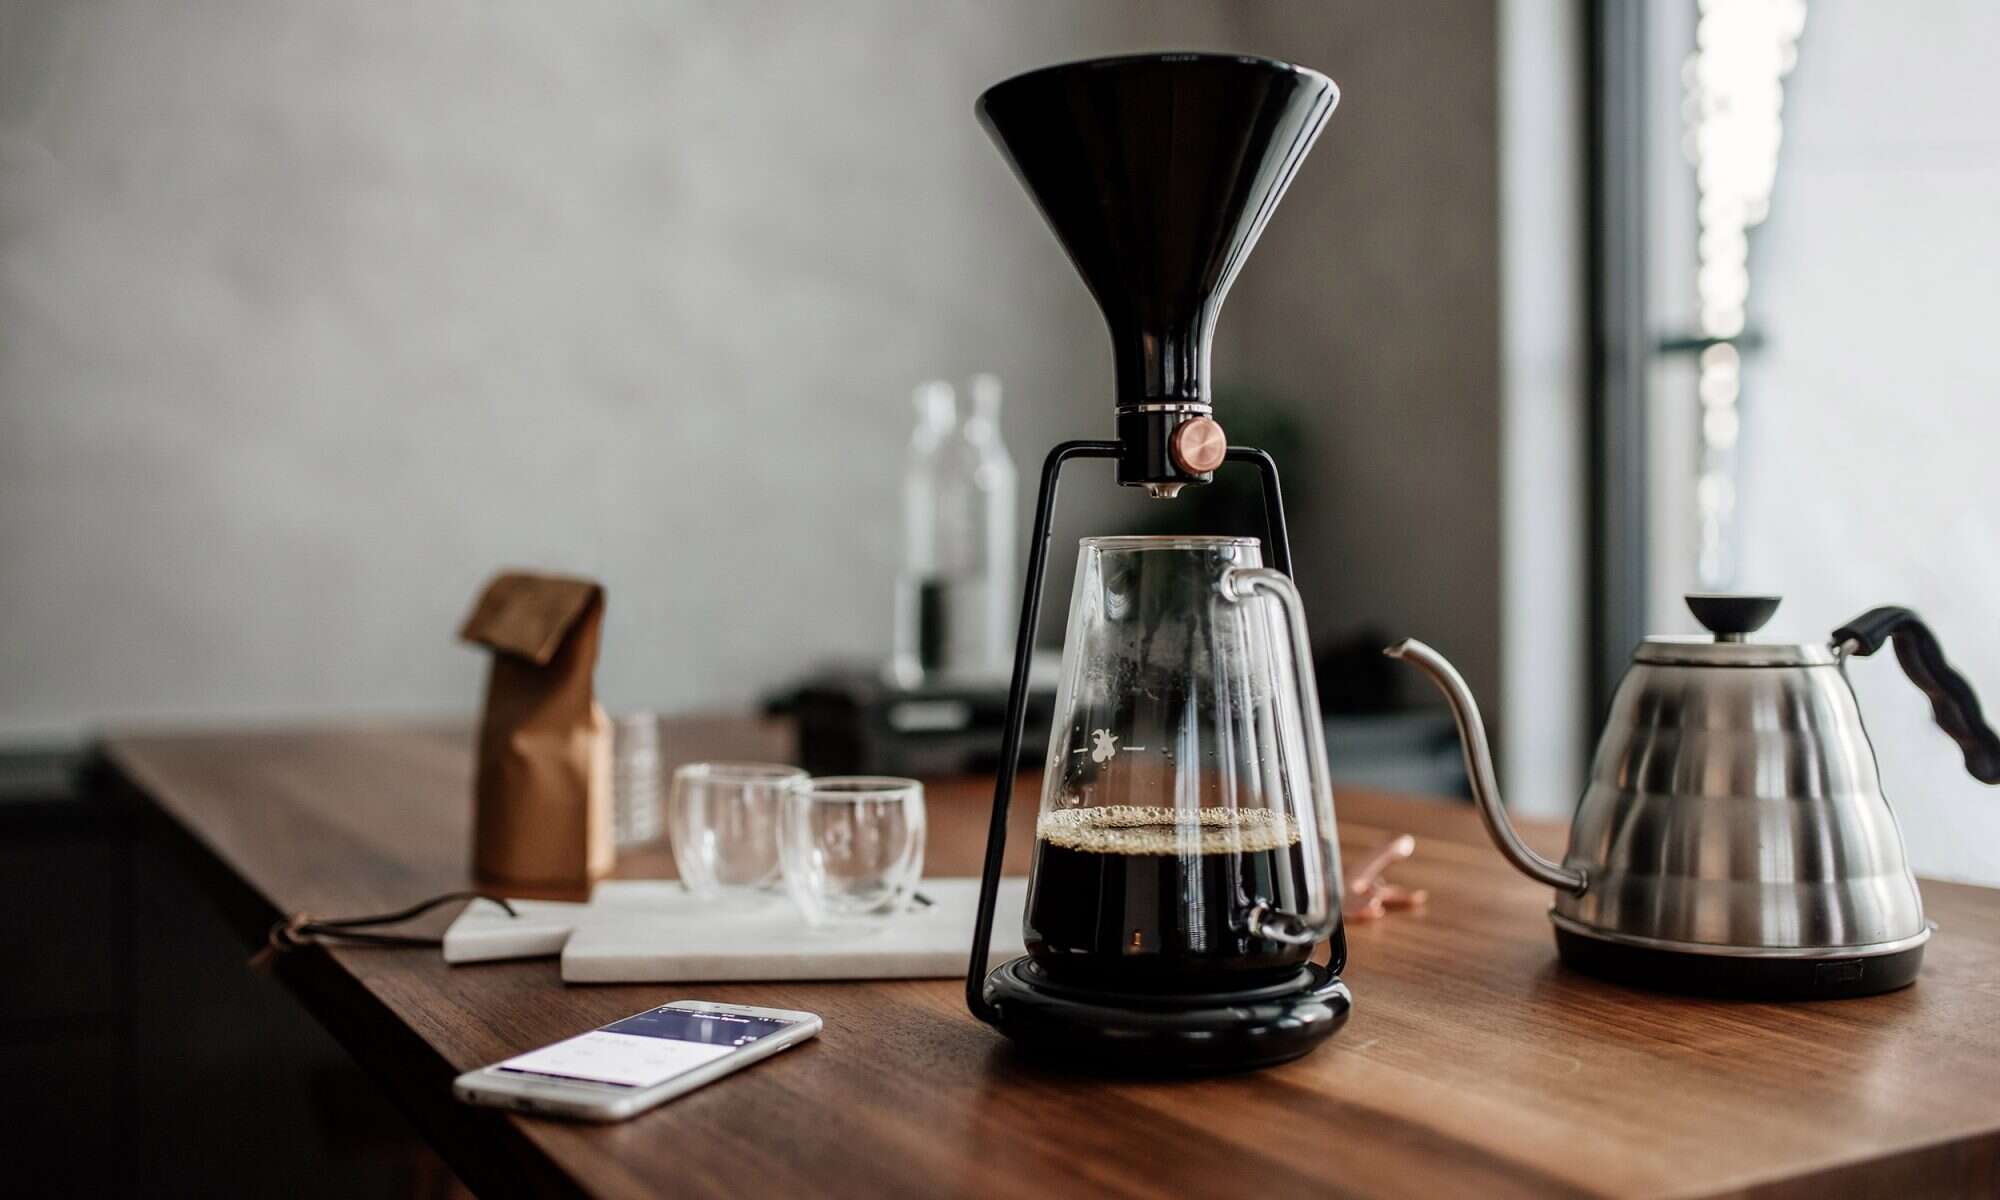 This Kickstarter project will transform any coffee machine into a